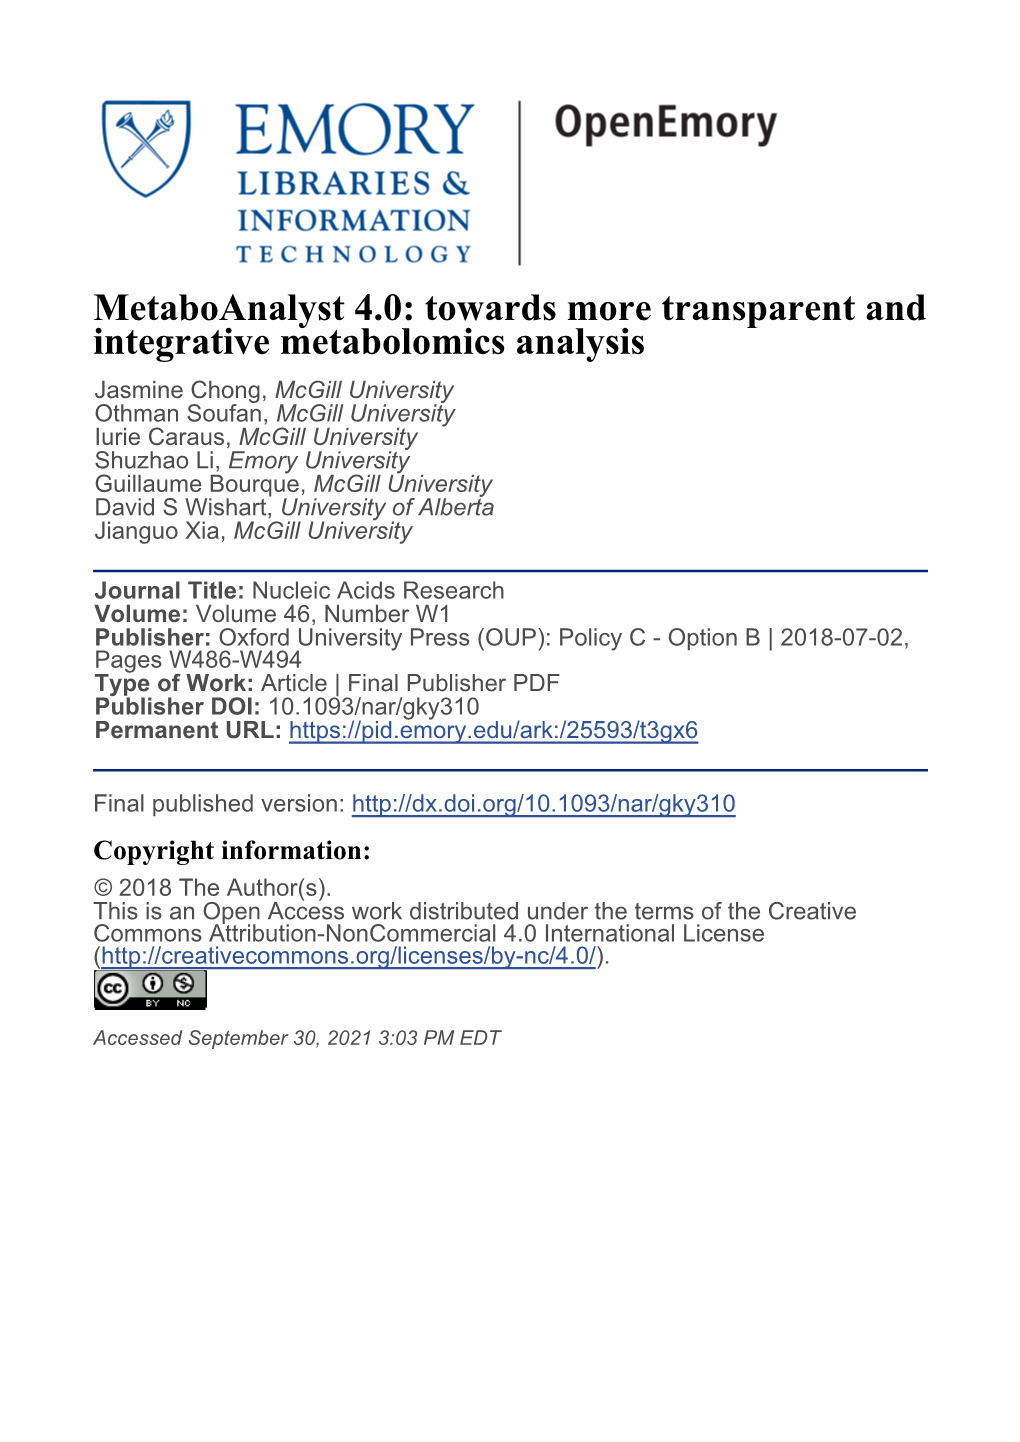 Metaboanalyst 4.0: Towards More Transparent and Integrative